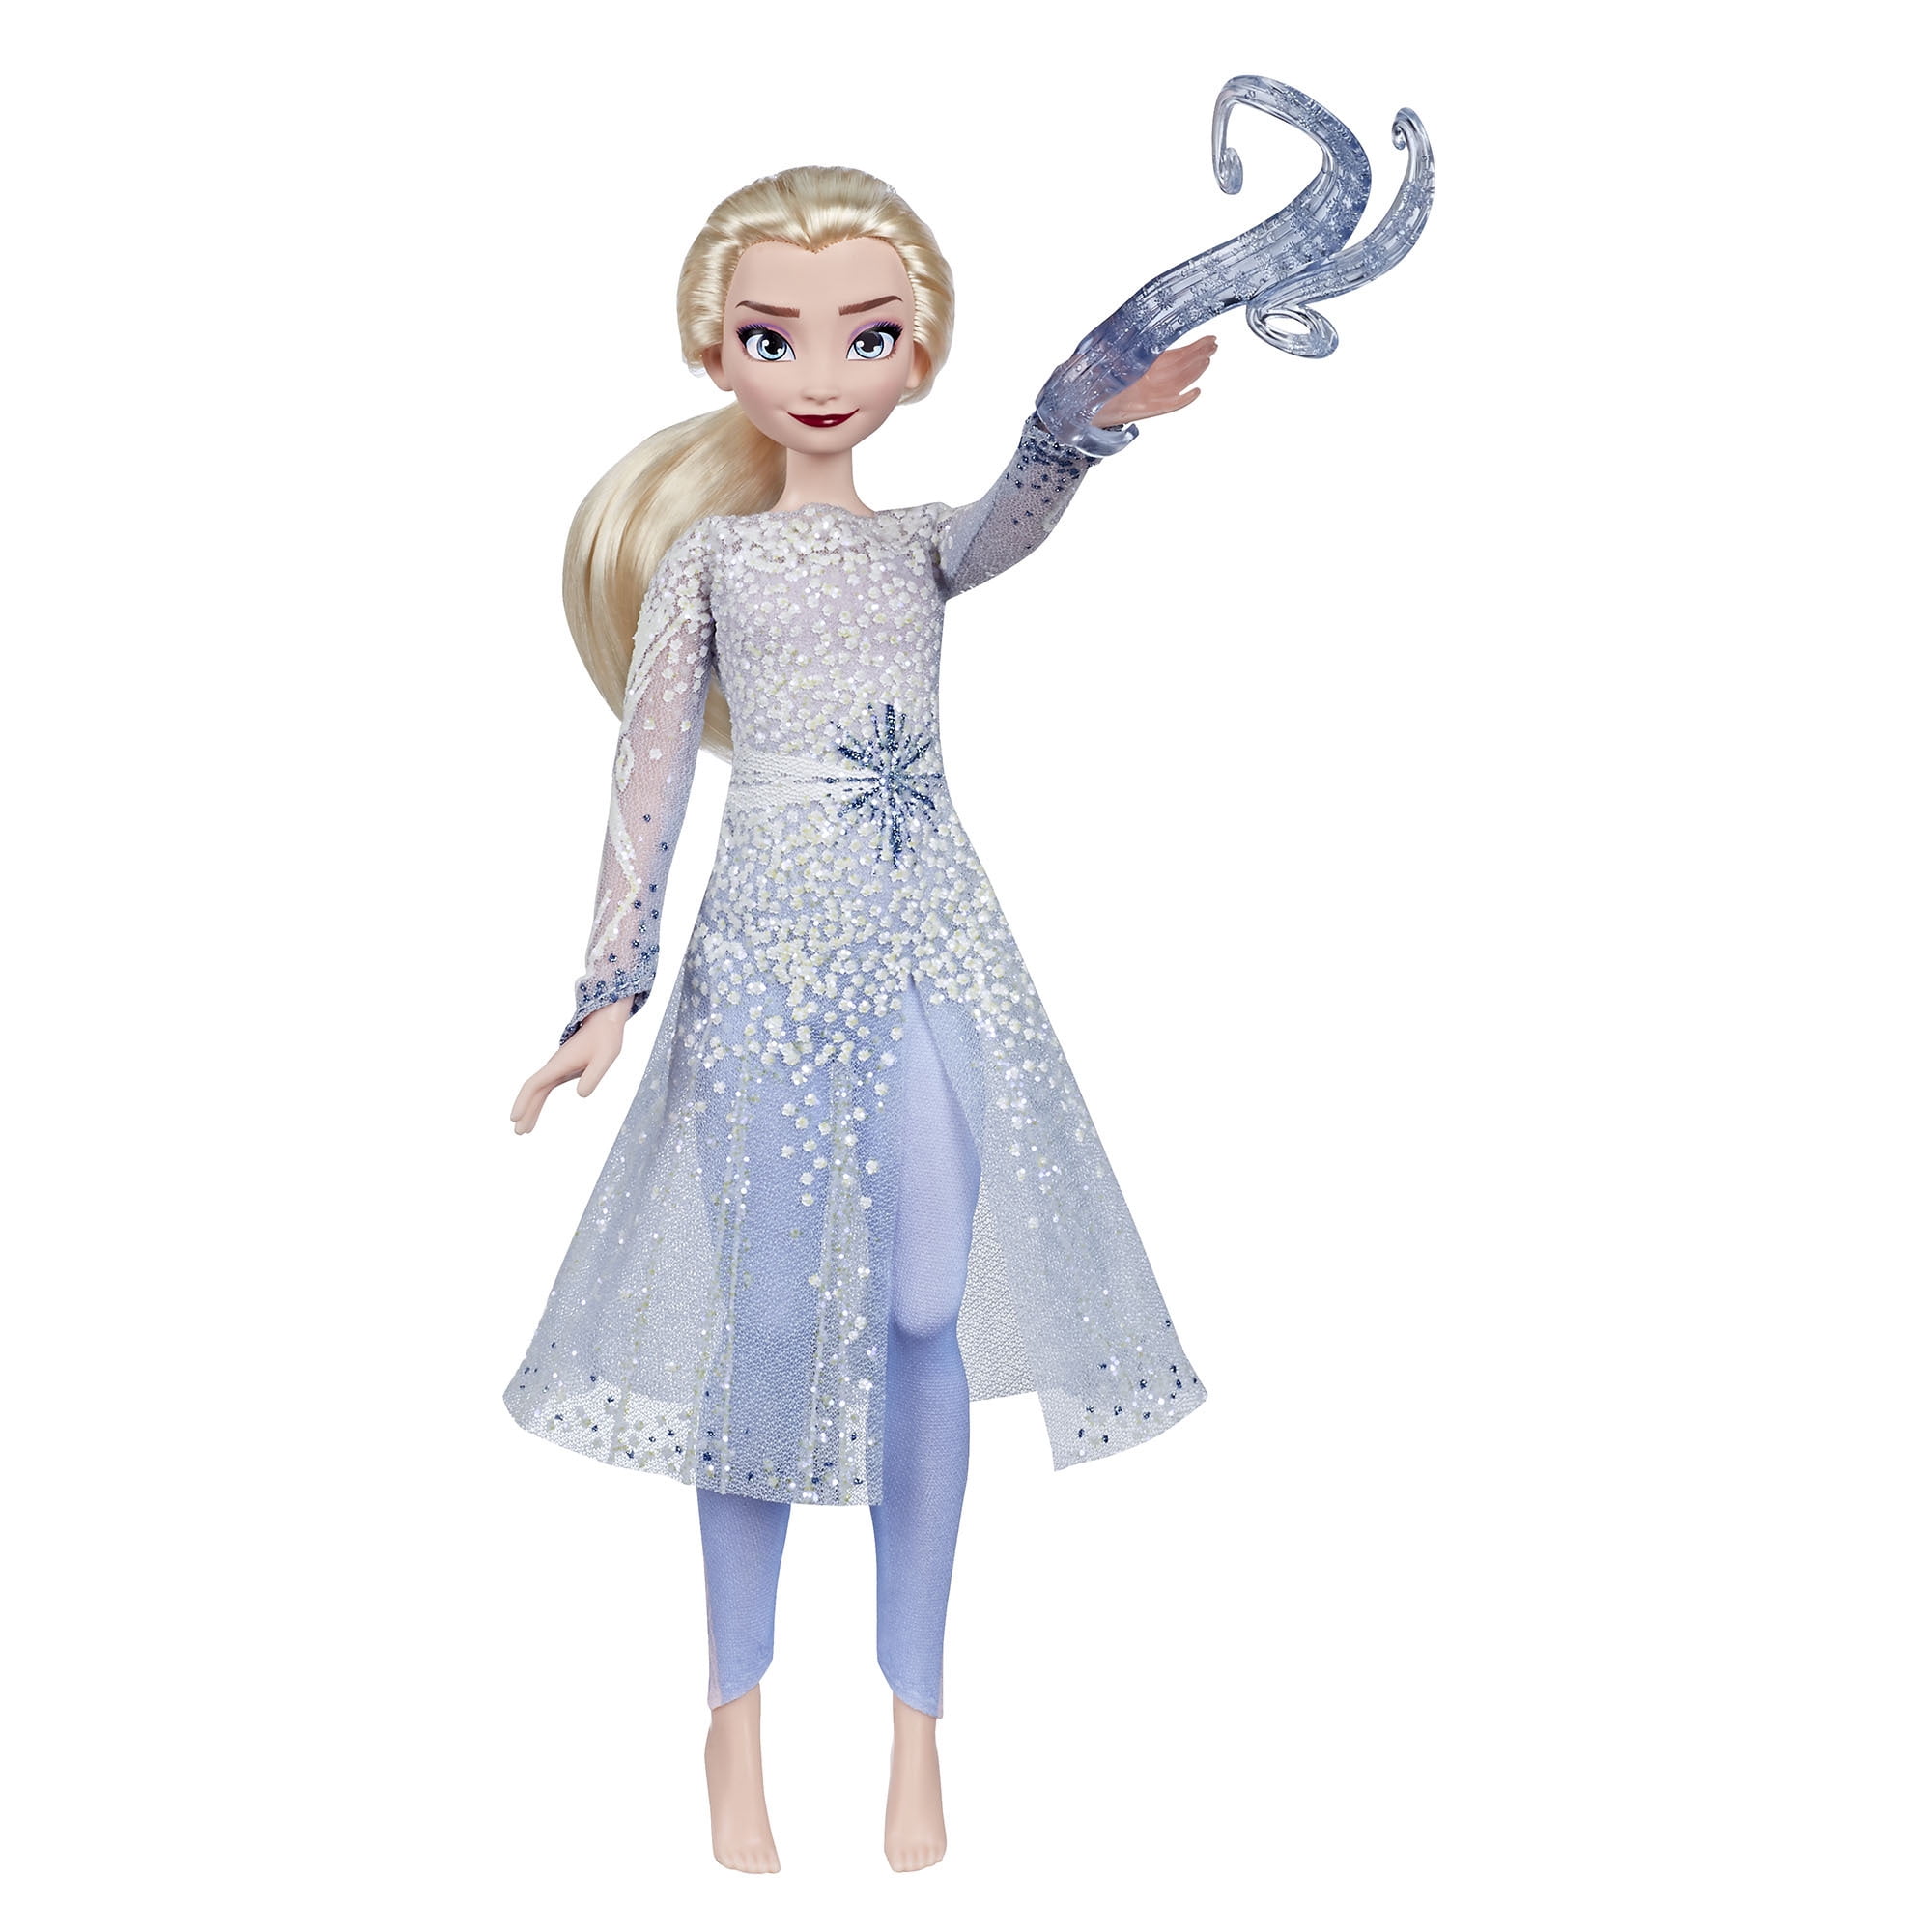 Hasbro Disney Frozen 2 Elsa Fashion Doll With Blue Outfit E5514 for sale online 